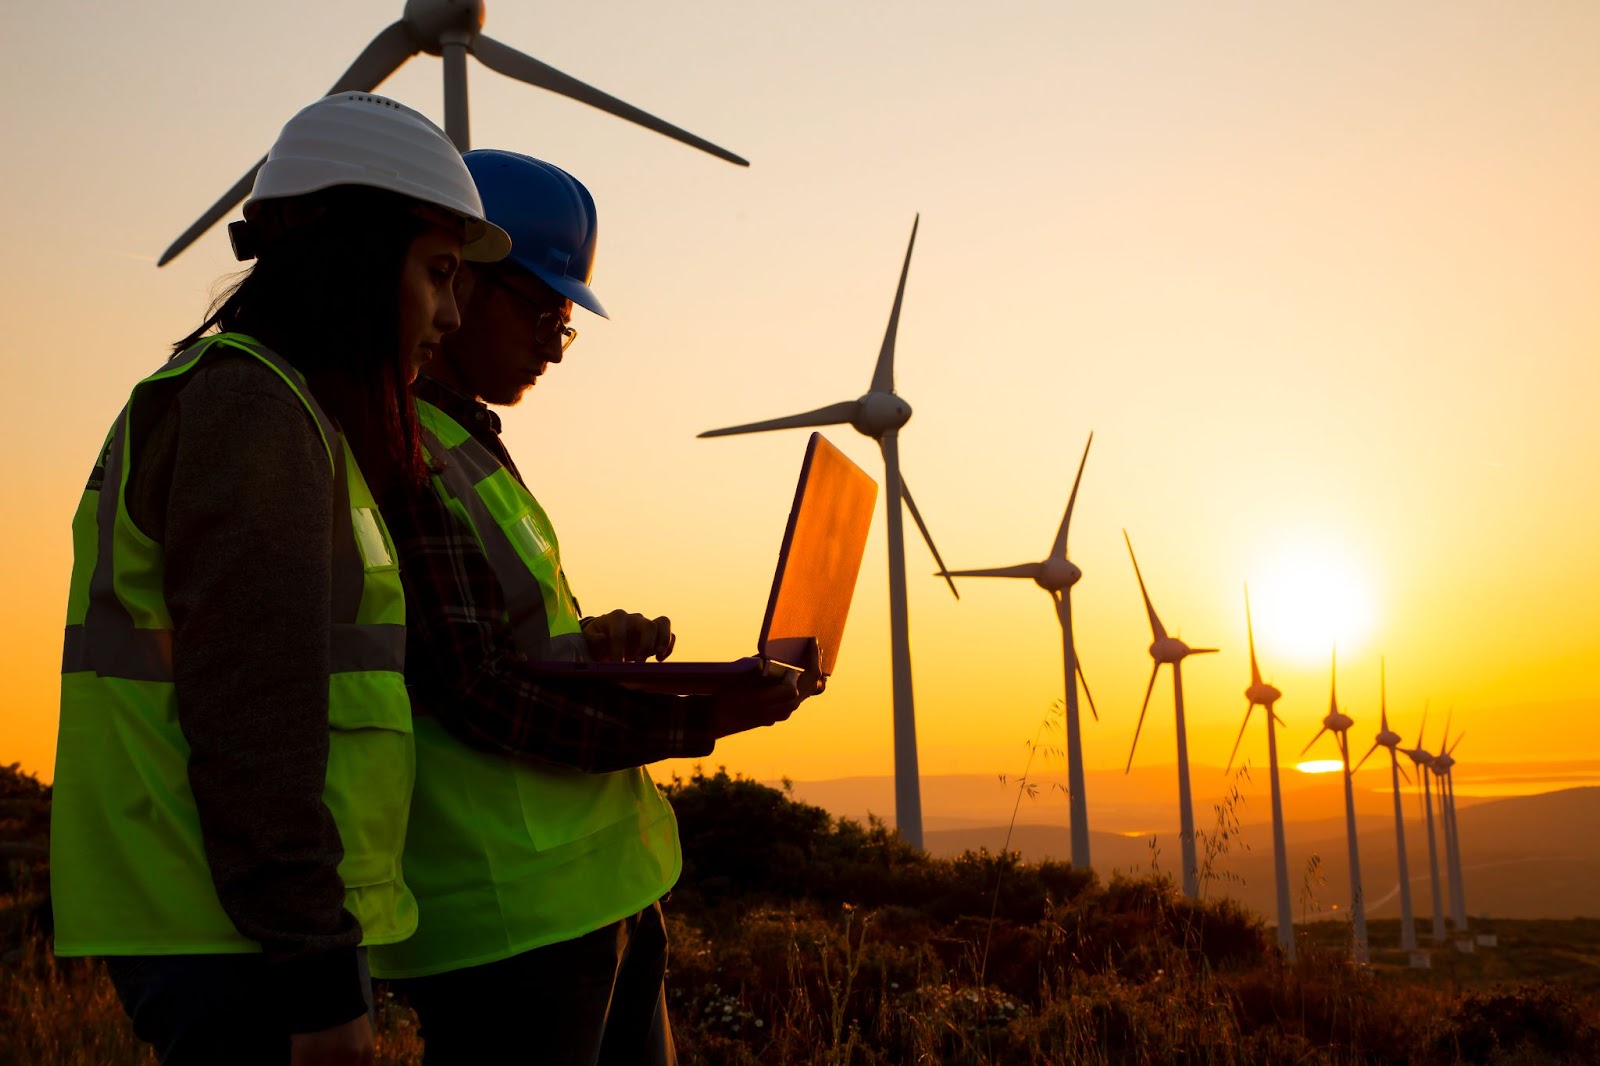 Learn More About the Wind Turbine Technician Program at PCI